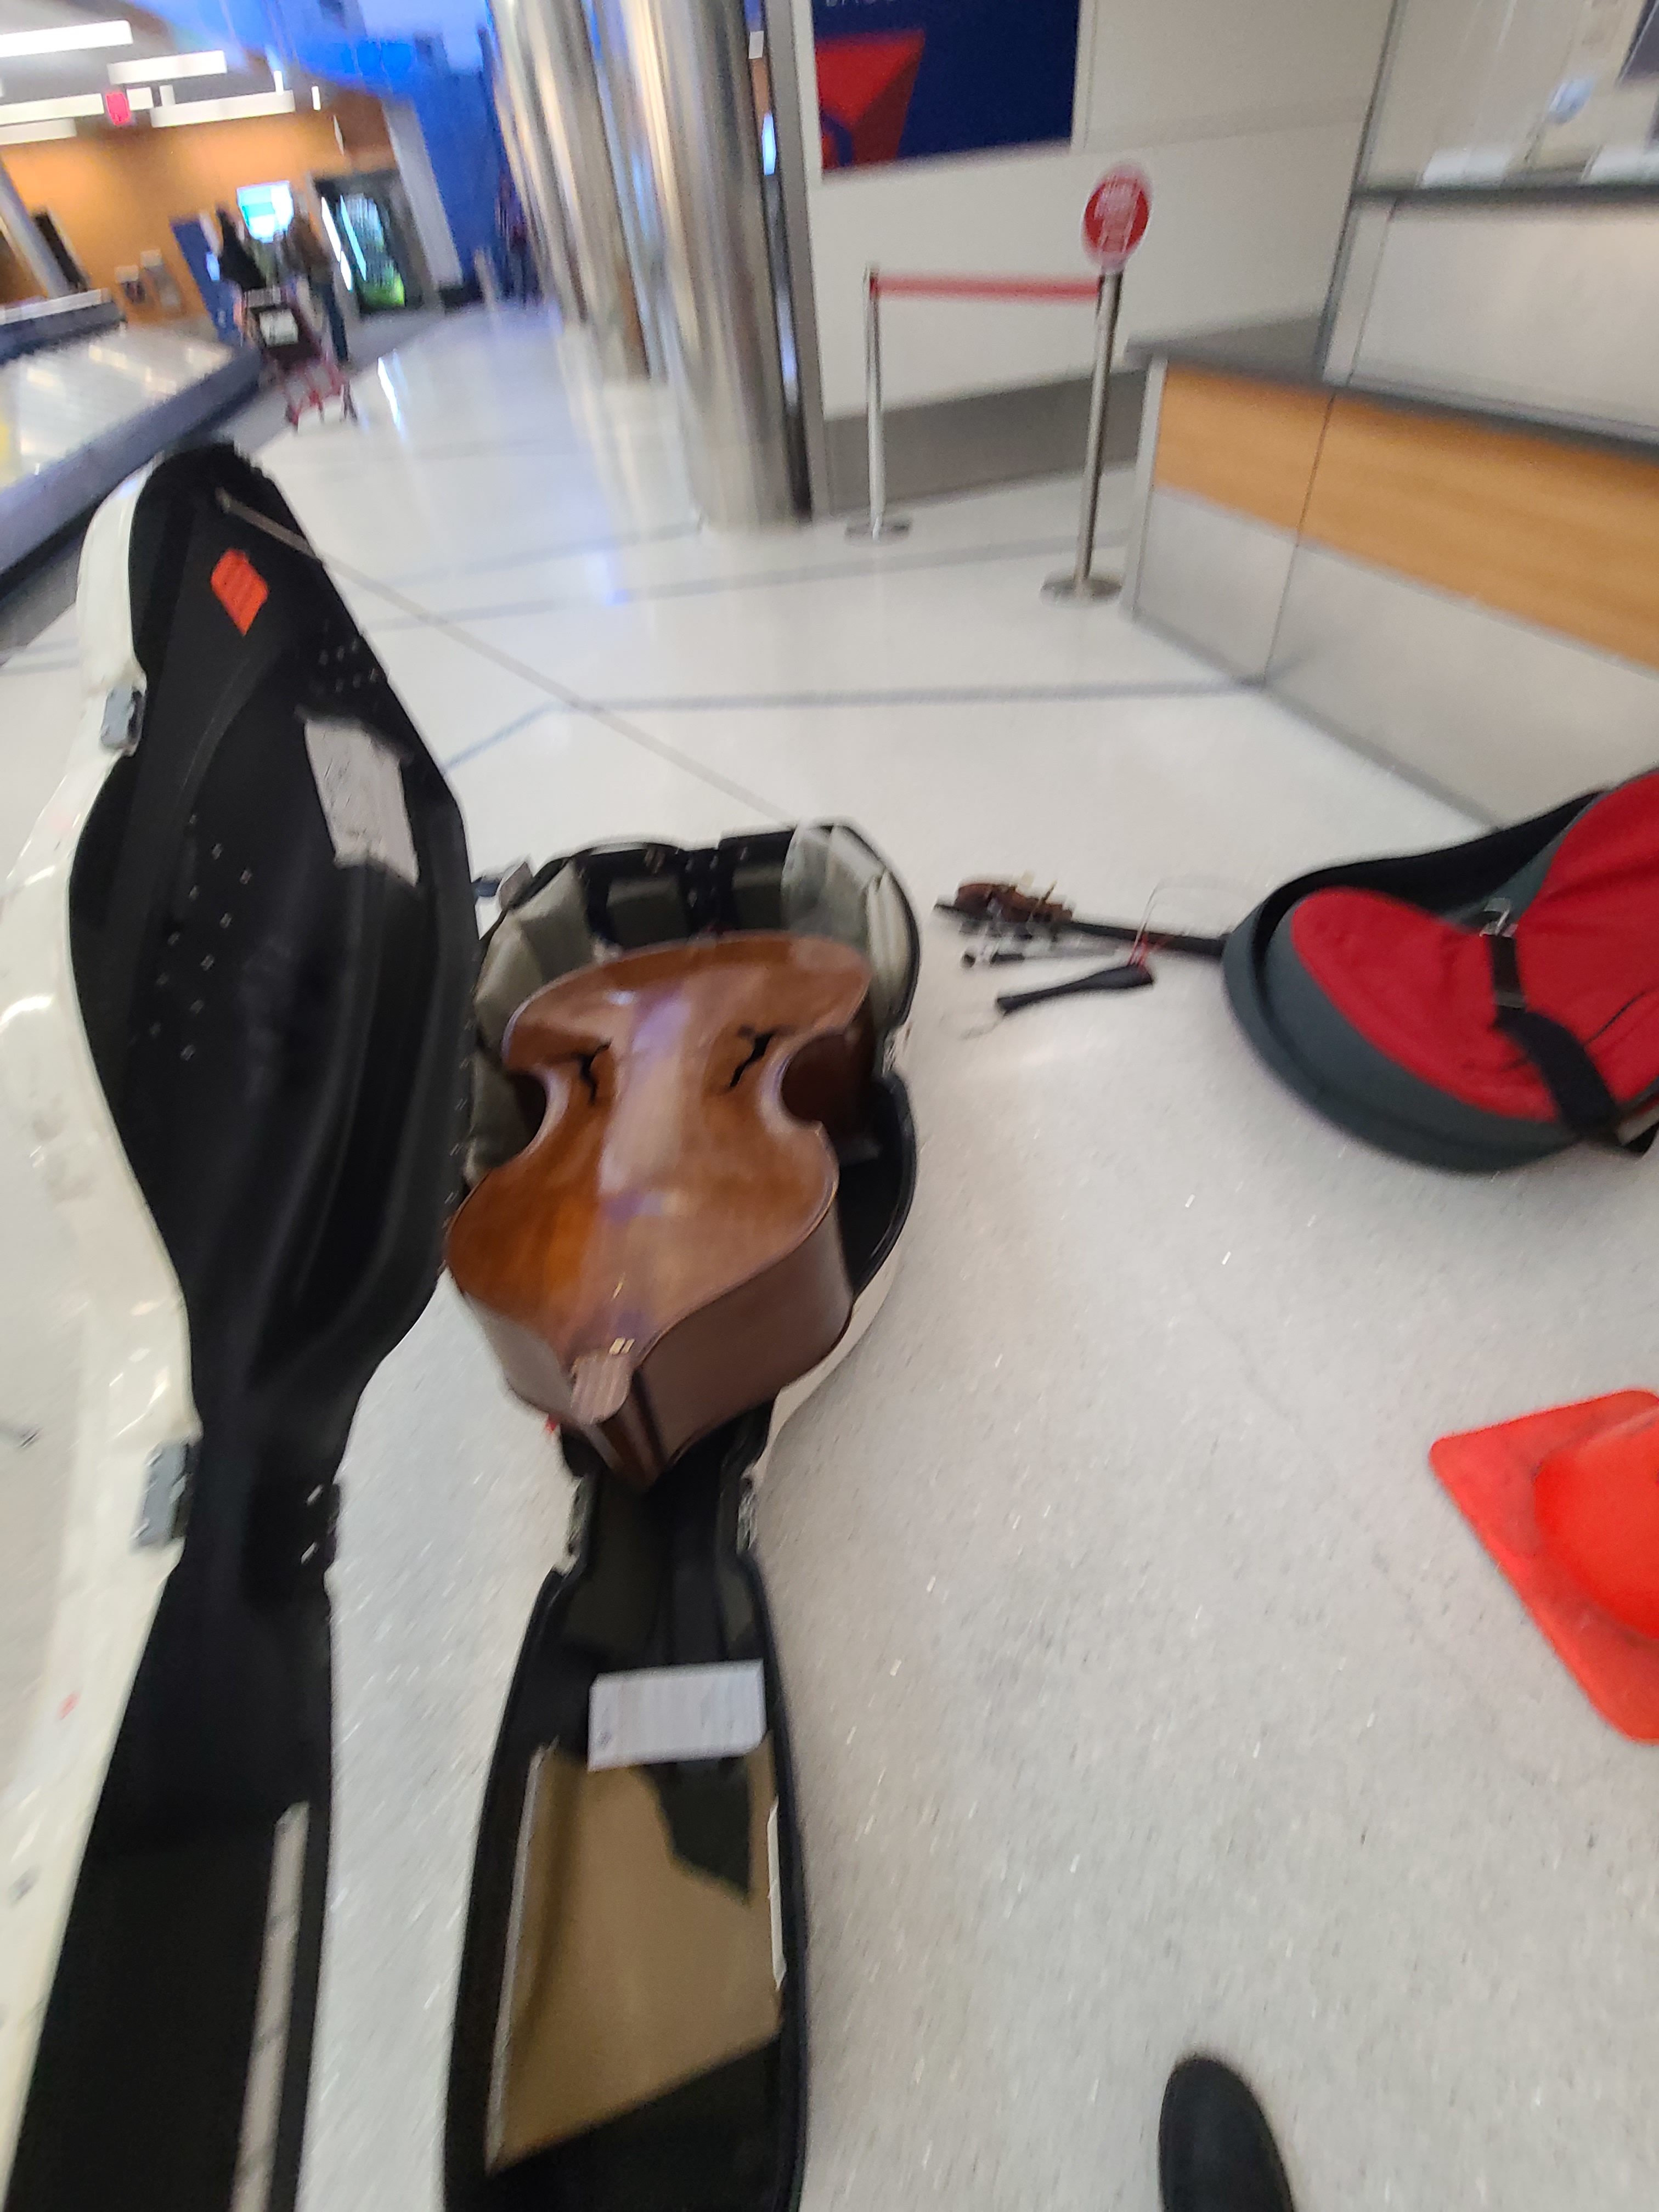 Flying again? US airline smashed my doublebass